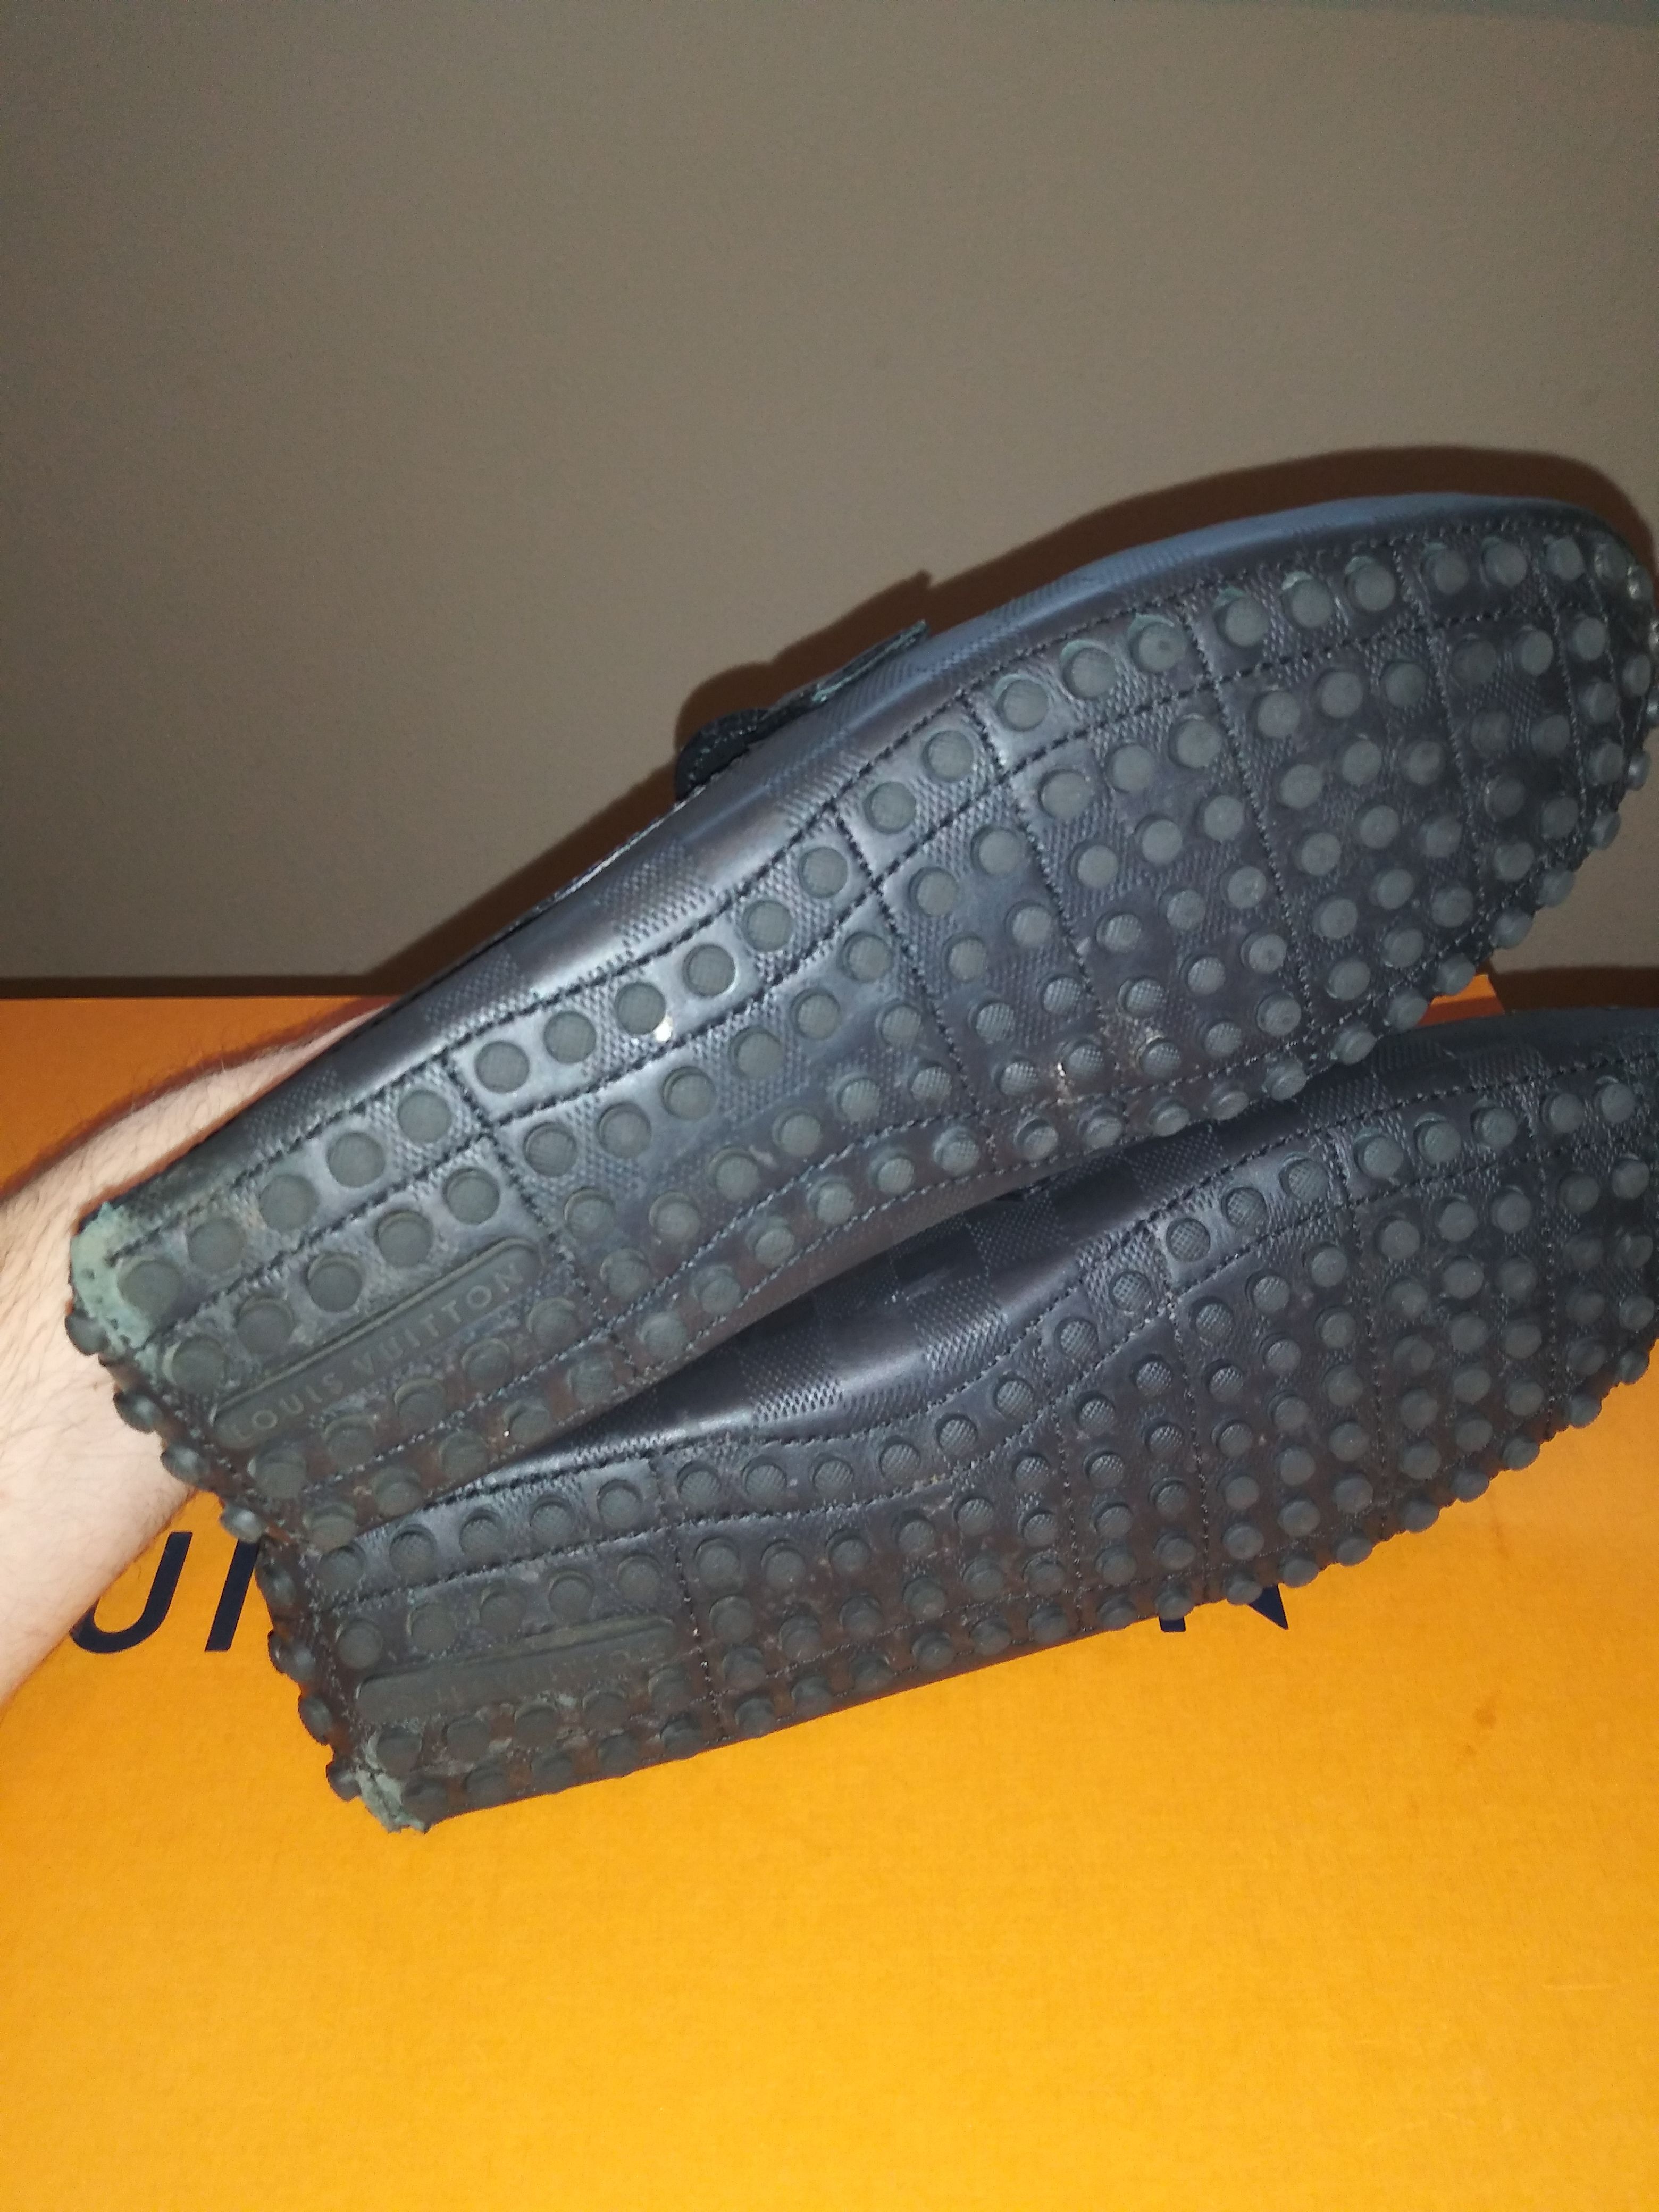 Sold at Auction: LOUIS VUITTON - HOCKENHEIM SUEDE MOCCASIN LOAFERS - 10.5